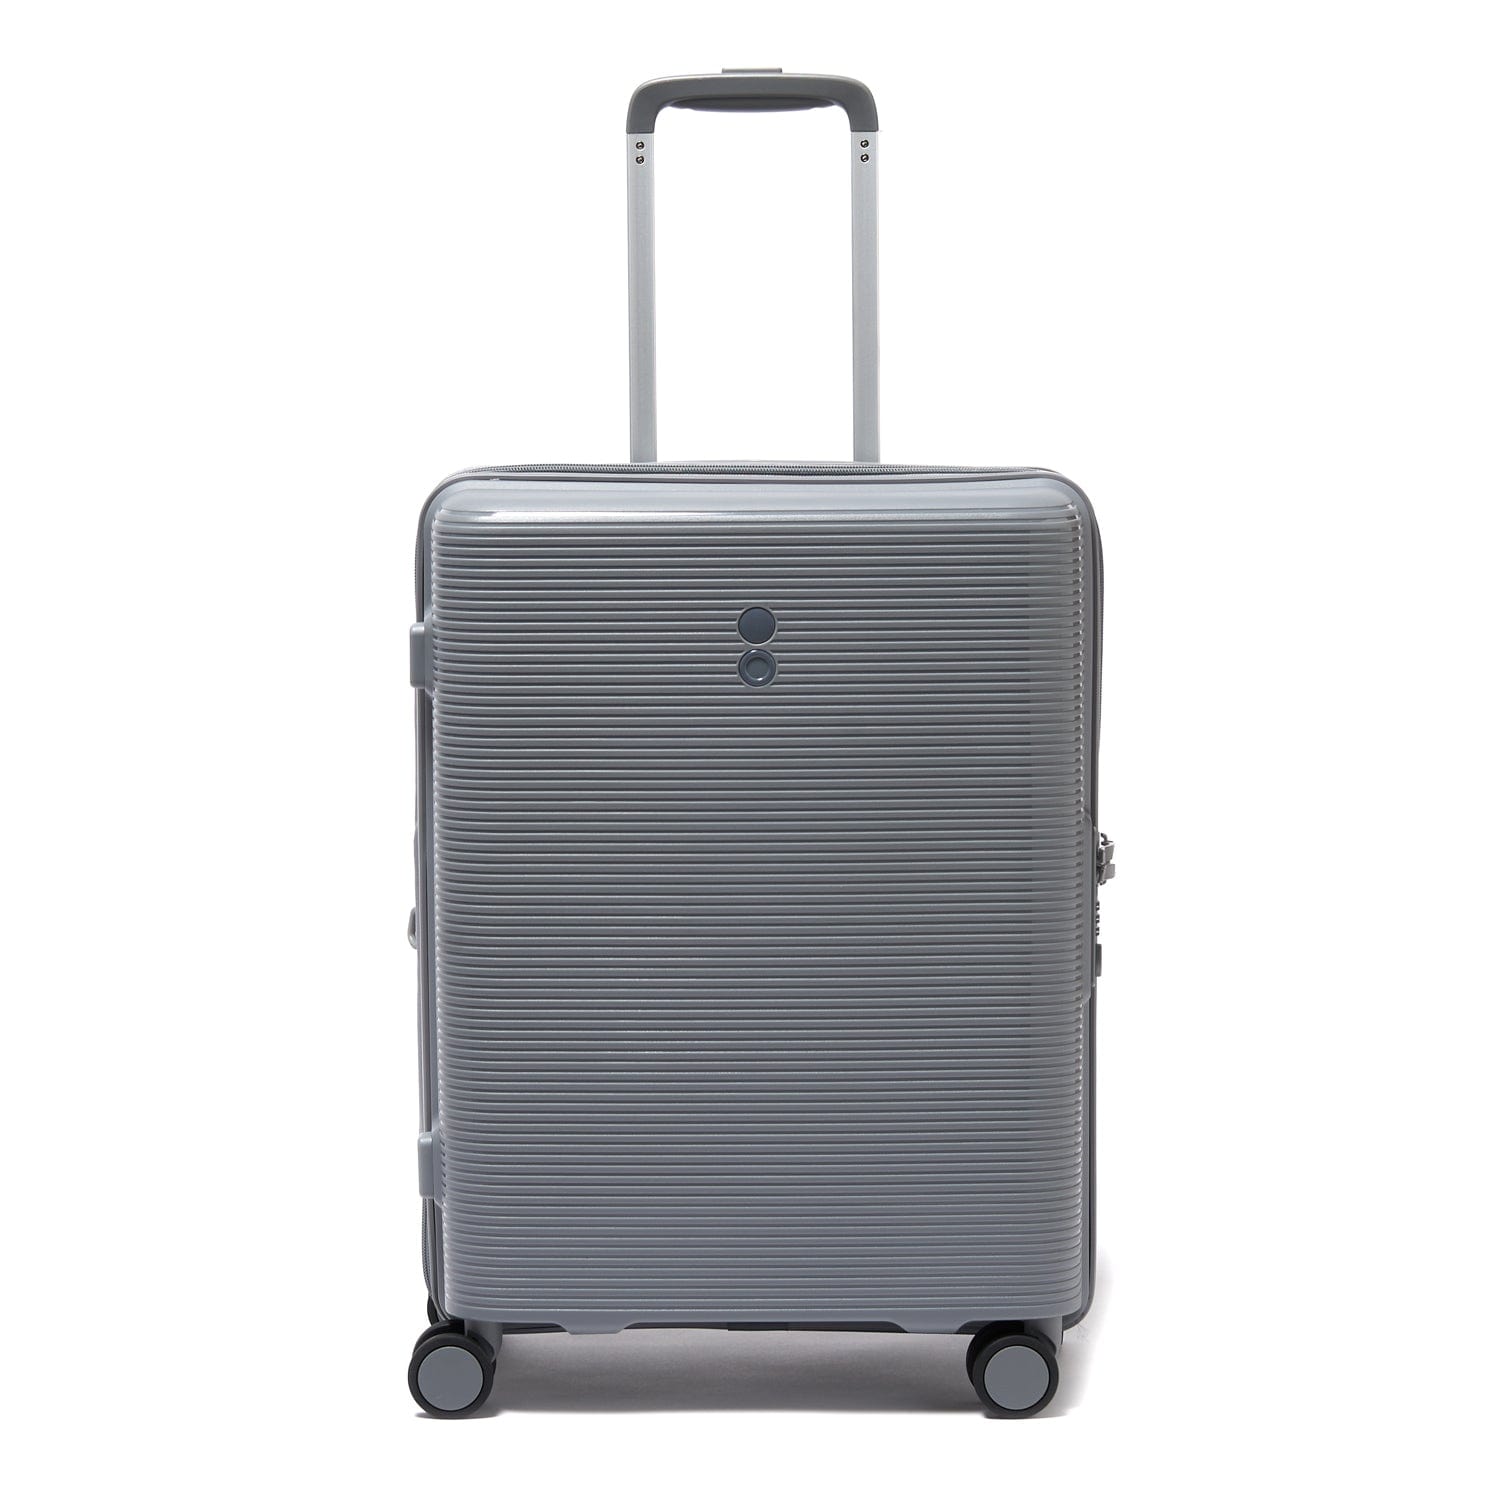 Echolac Forza 55cm Hardcase Expandable 4 Double Wheel Cabin Luggage Trolley Gray - PW005 20 Arctic Grey